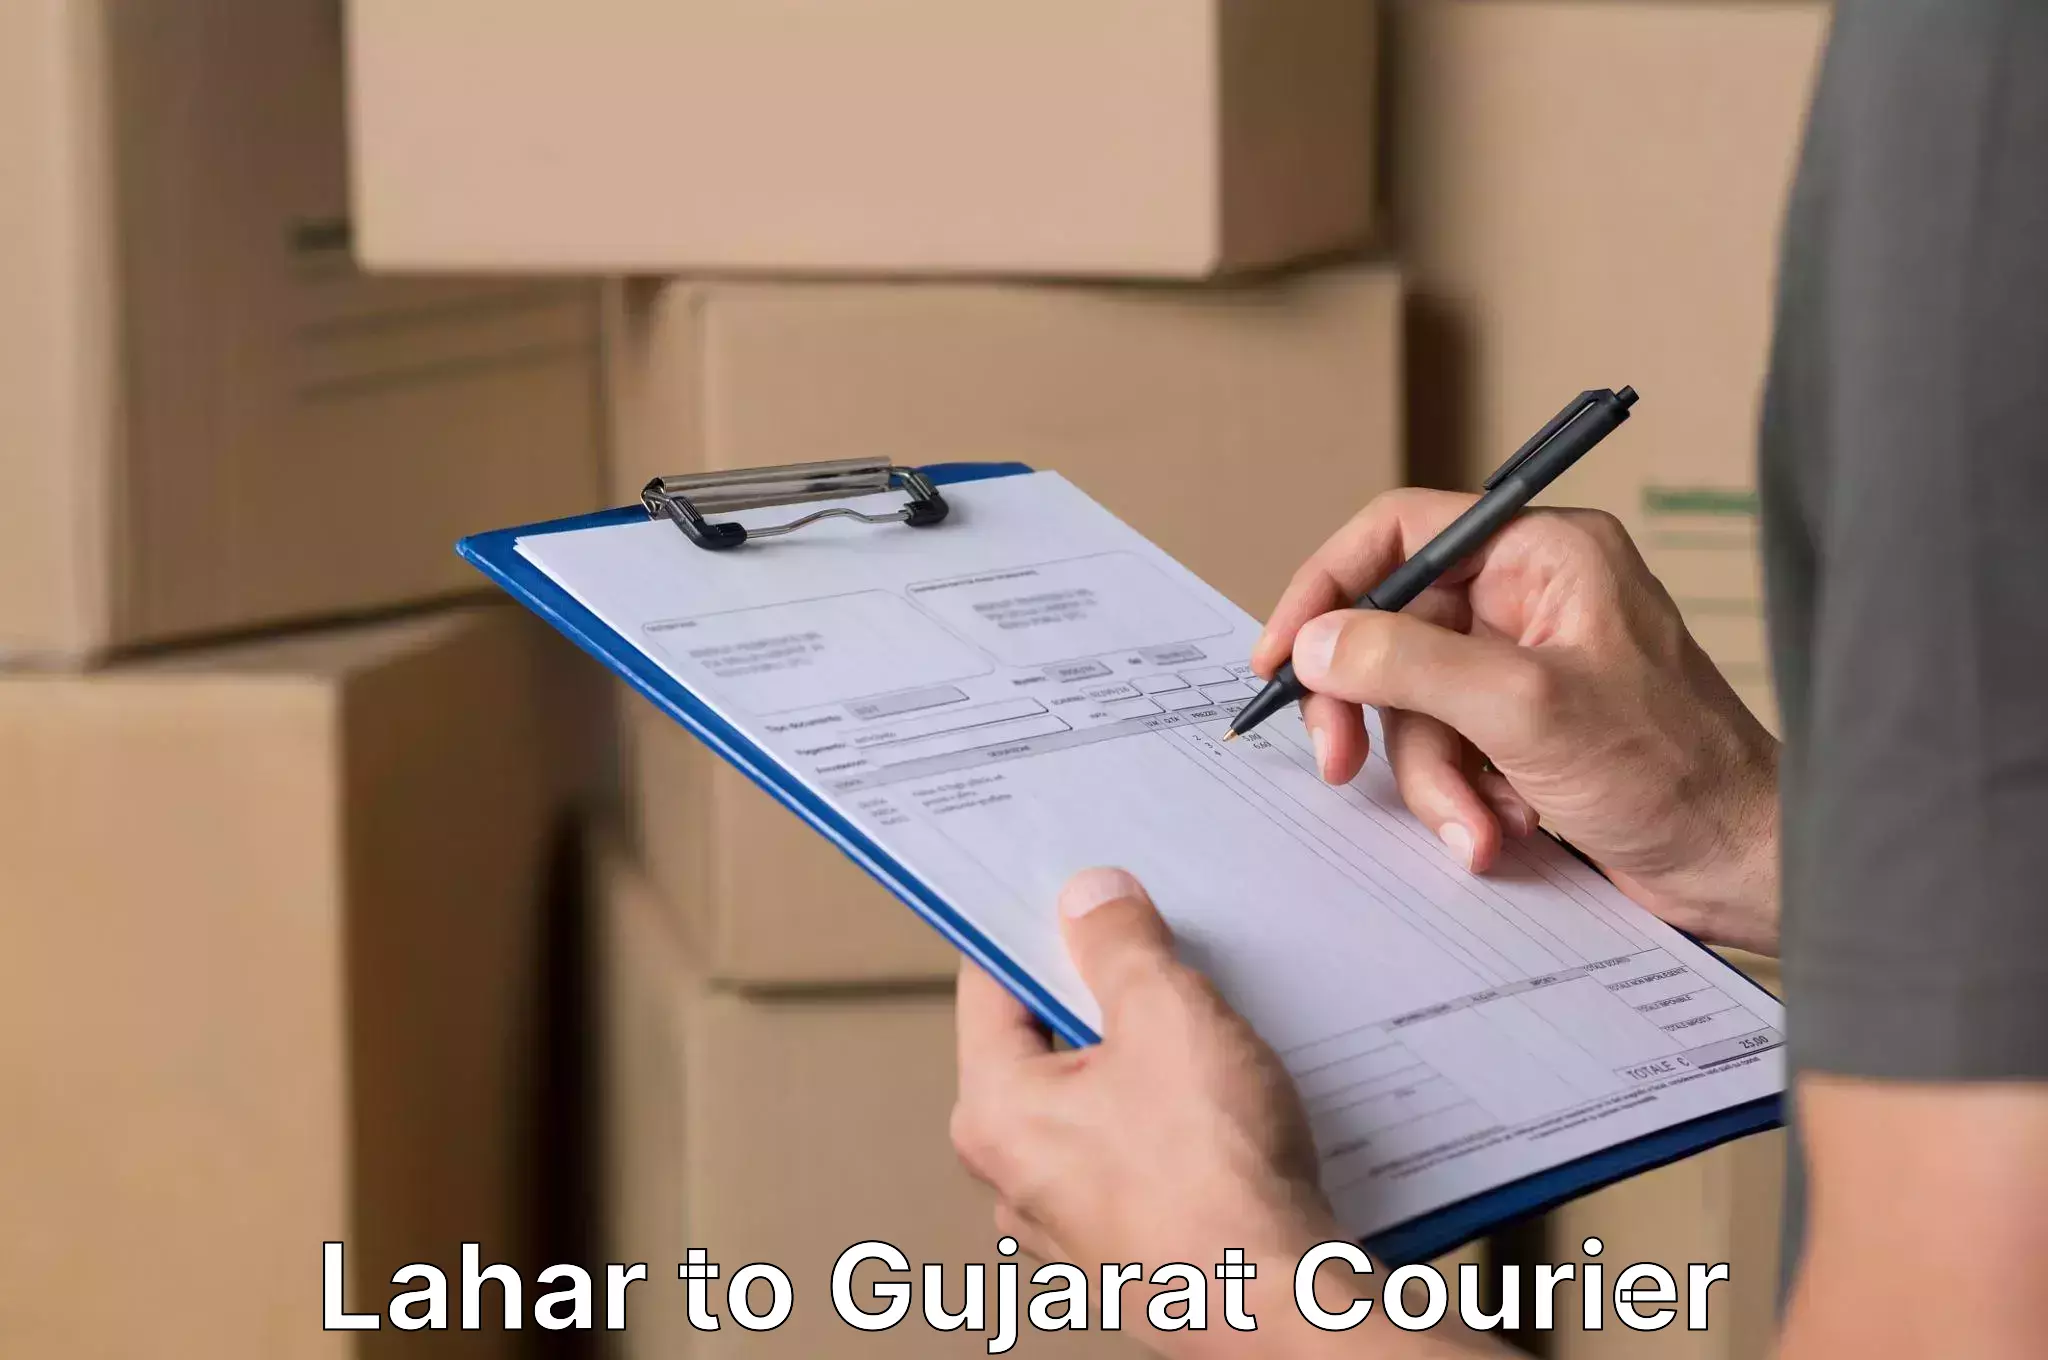 Personalized relocation plans Lahar to Gujarat